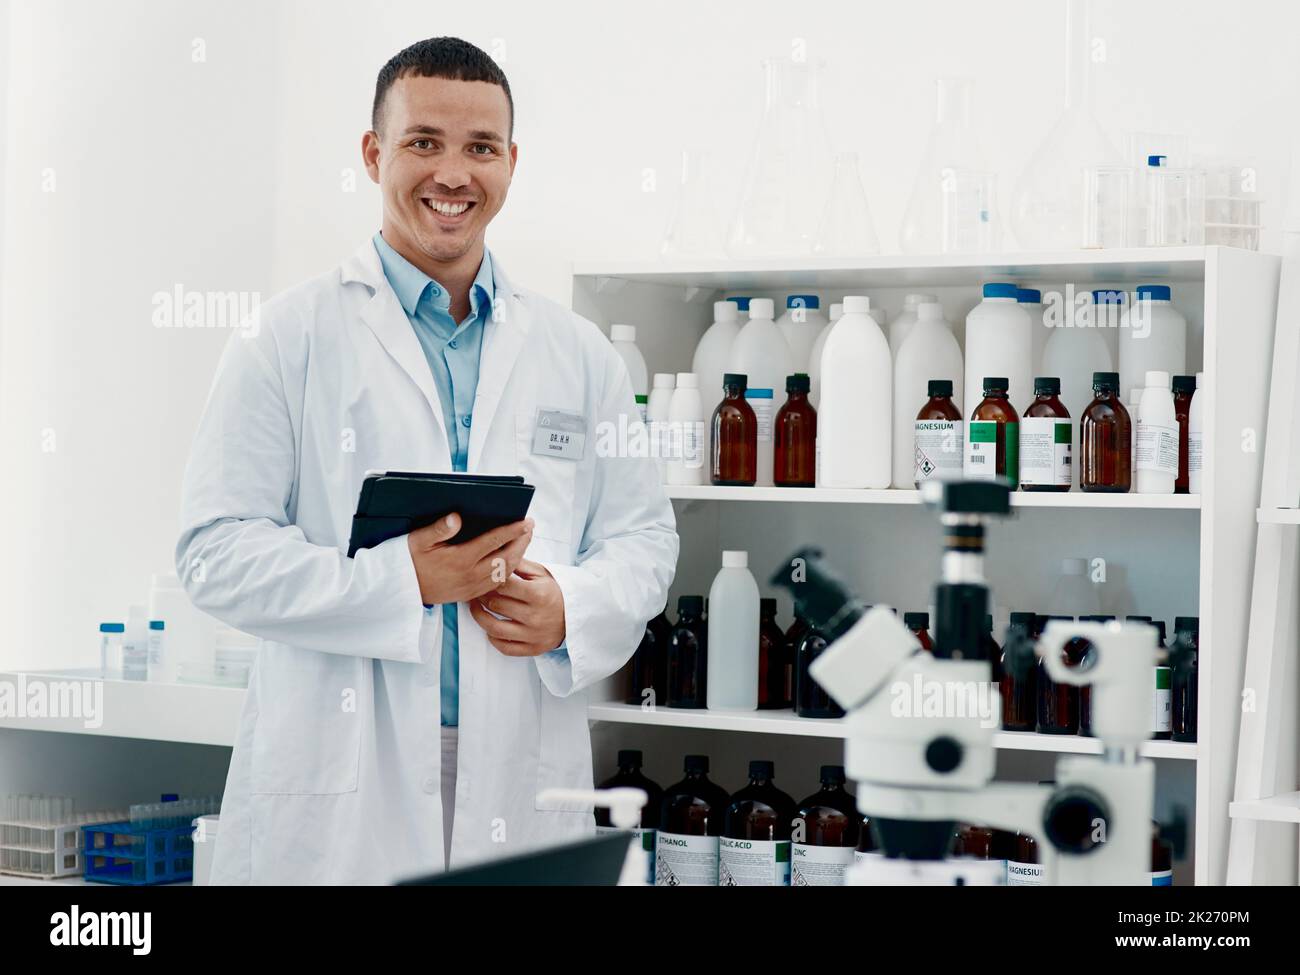 The world will remember his work. Portrait of a confident young scientist working in a modern laboratory. Stock Photo